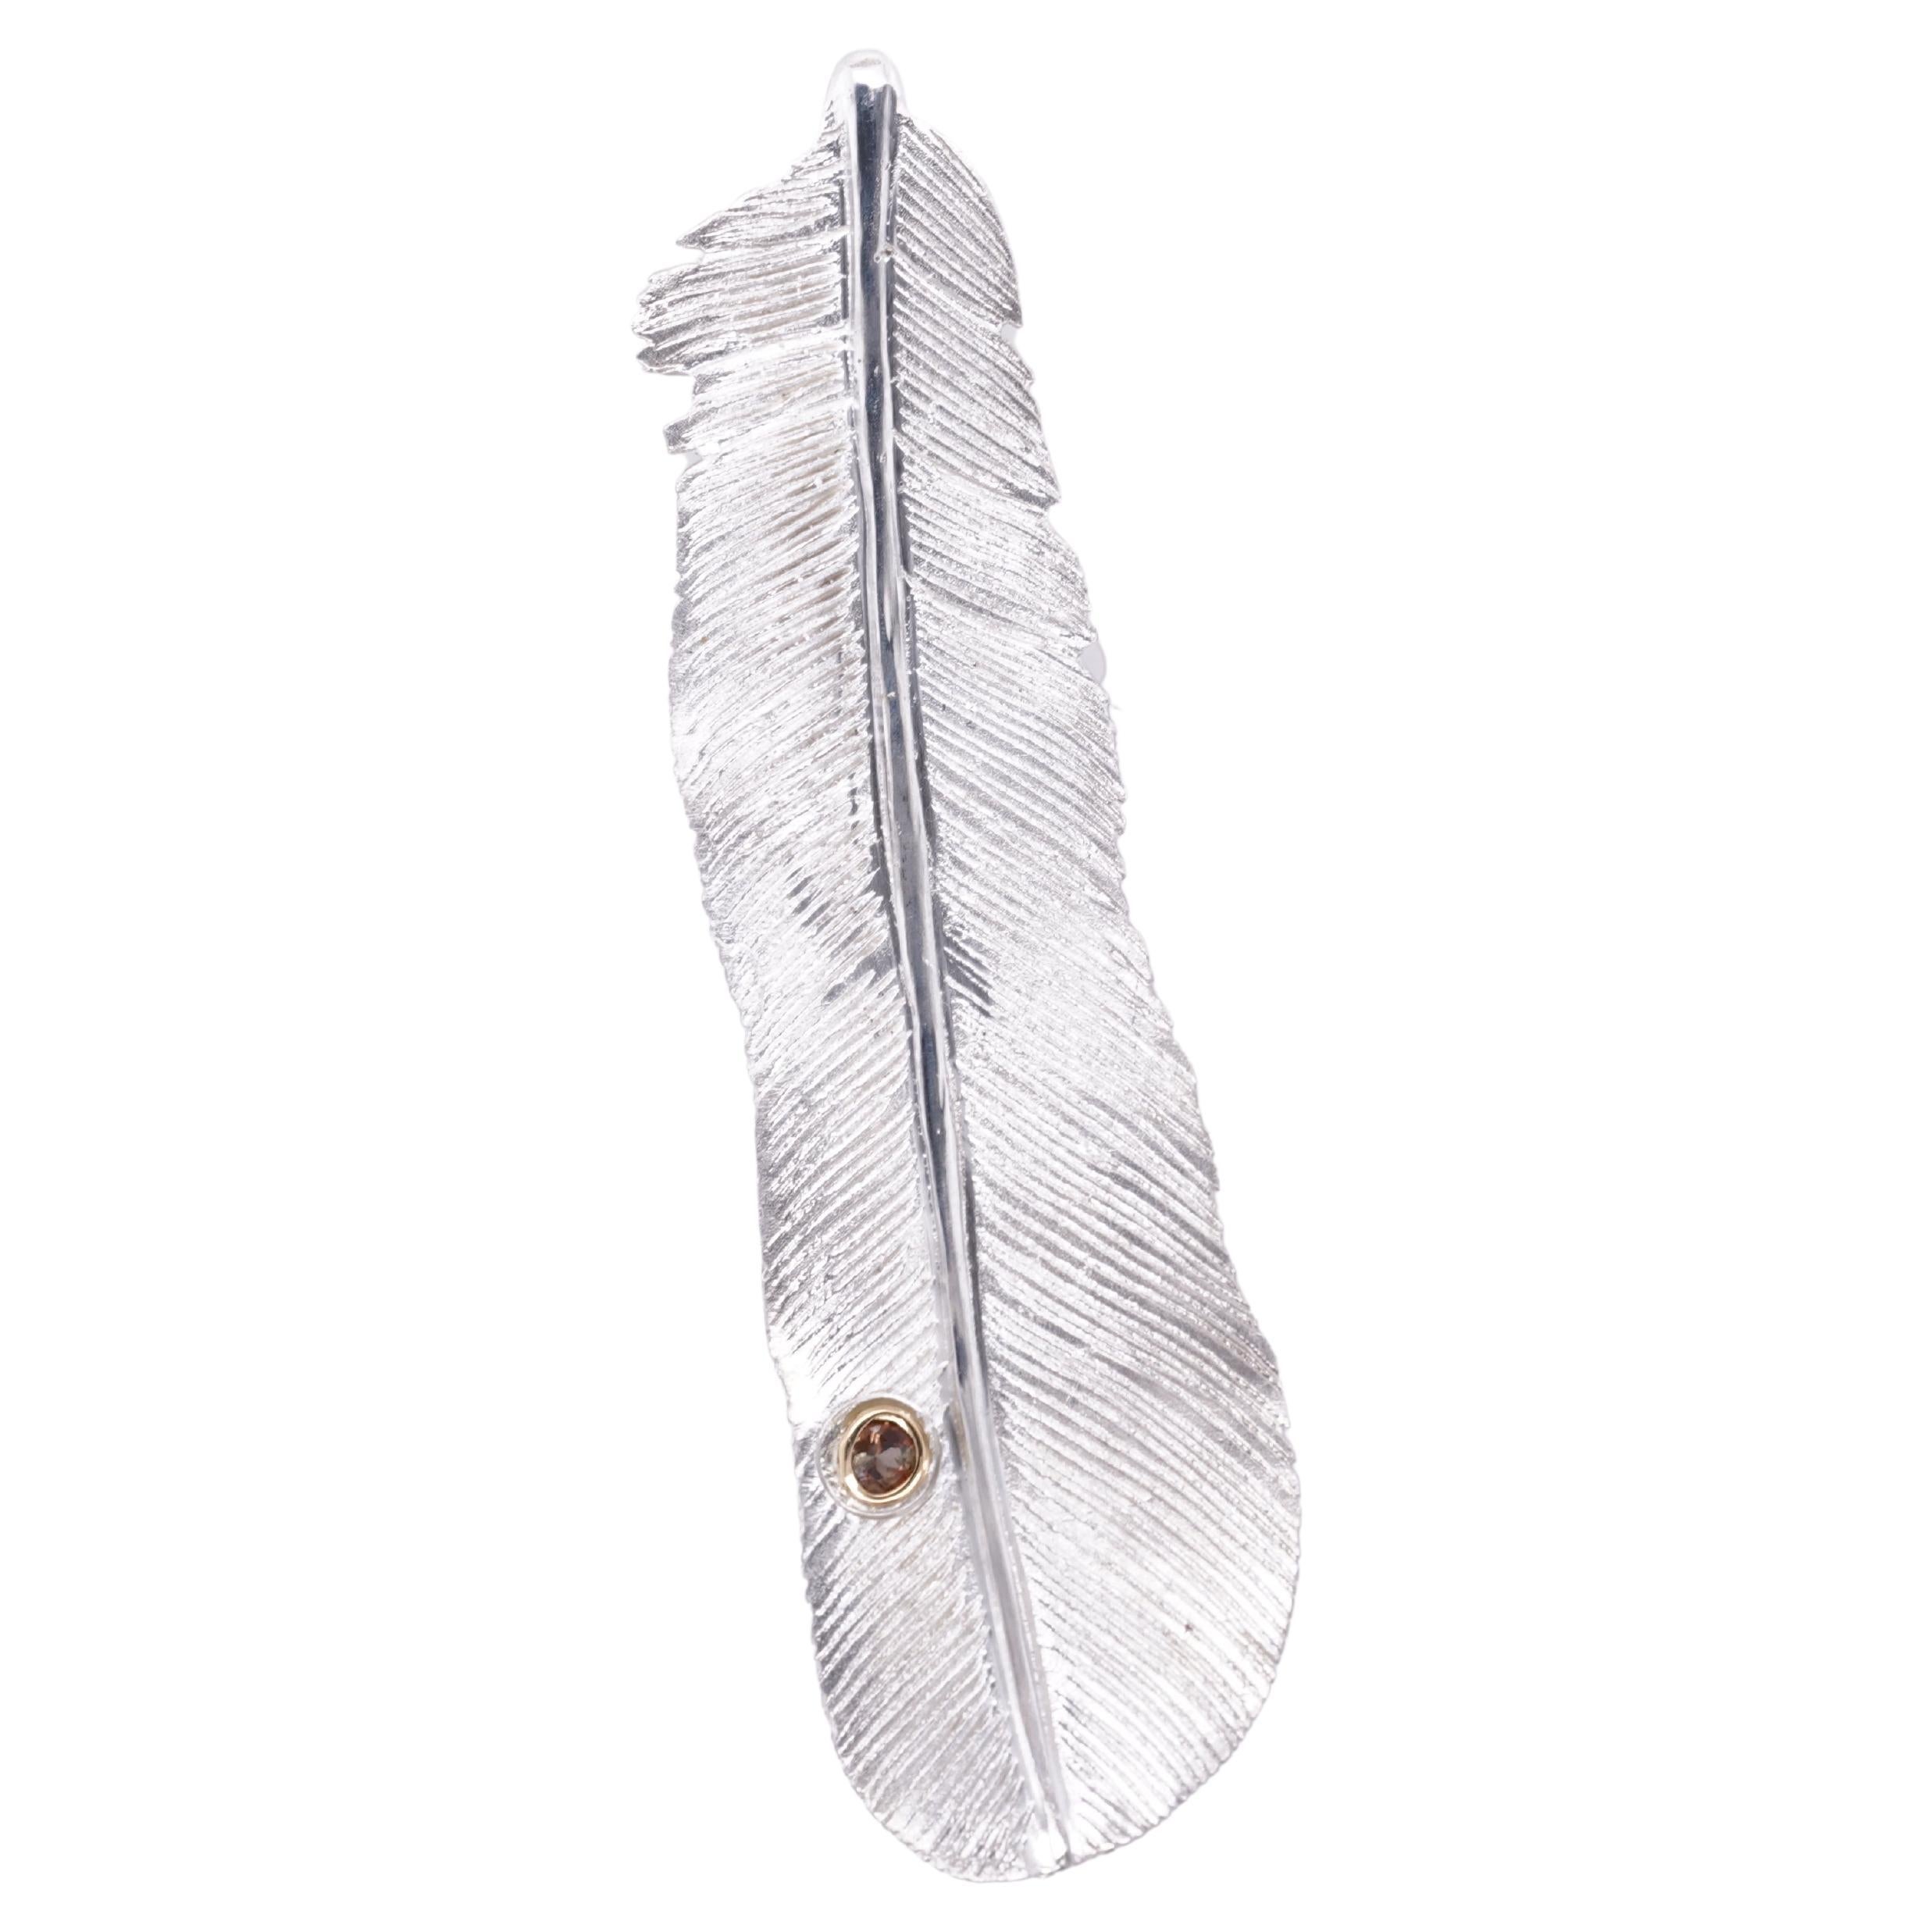 Medium Sterling Silver Detailed Feather Brooch with Andalusite detail set in 18K Yellow Gold Bezel, by Ashley Childs

This feather was originally carved by 